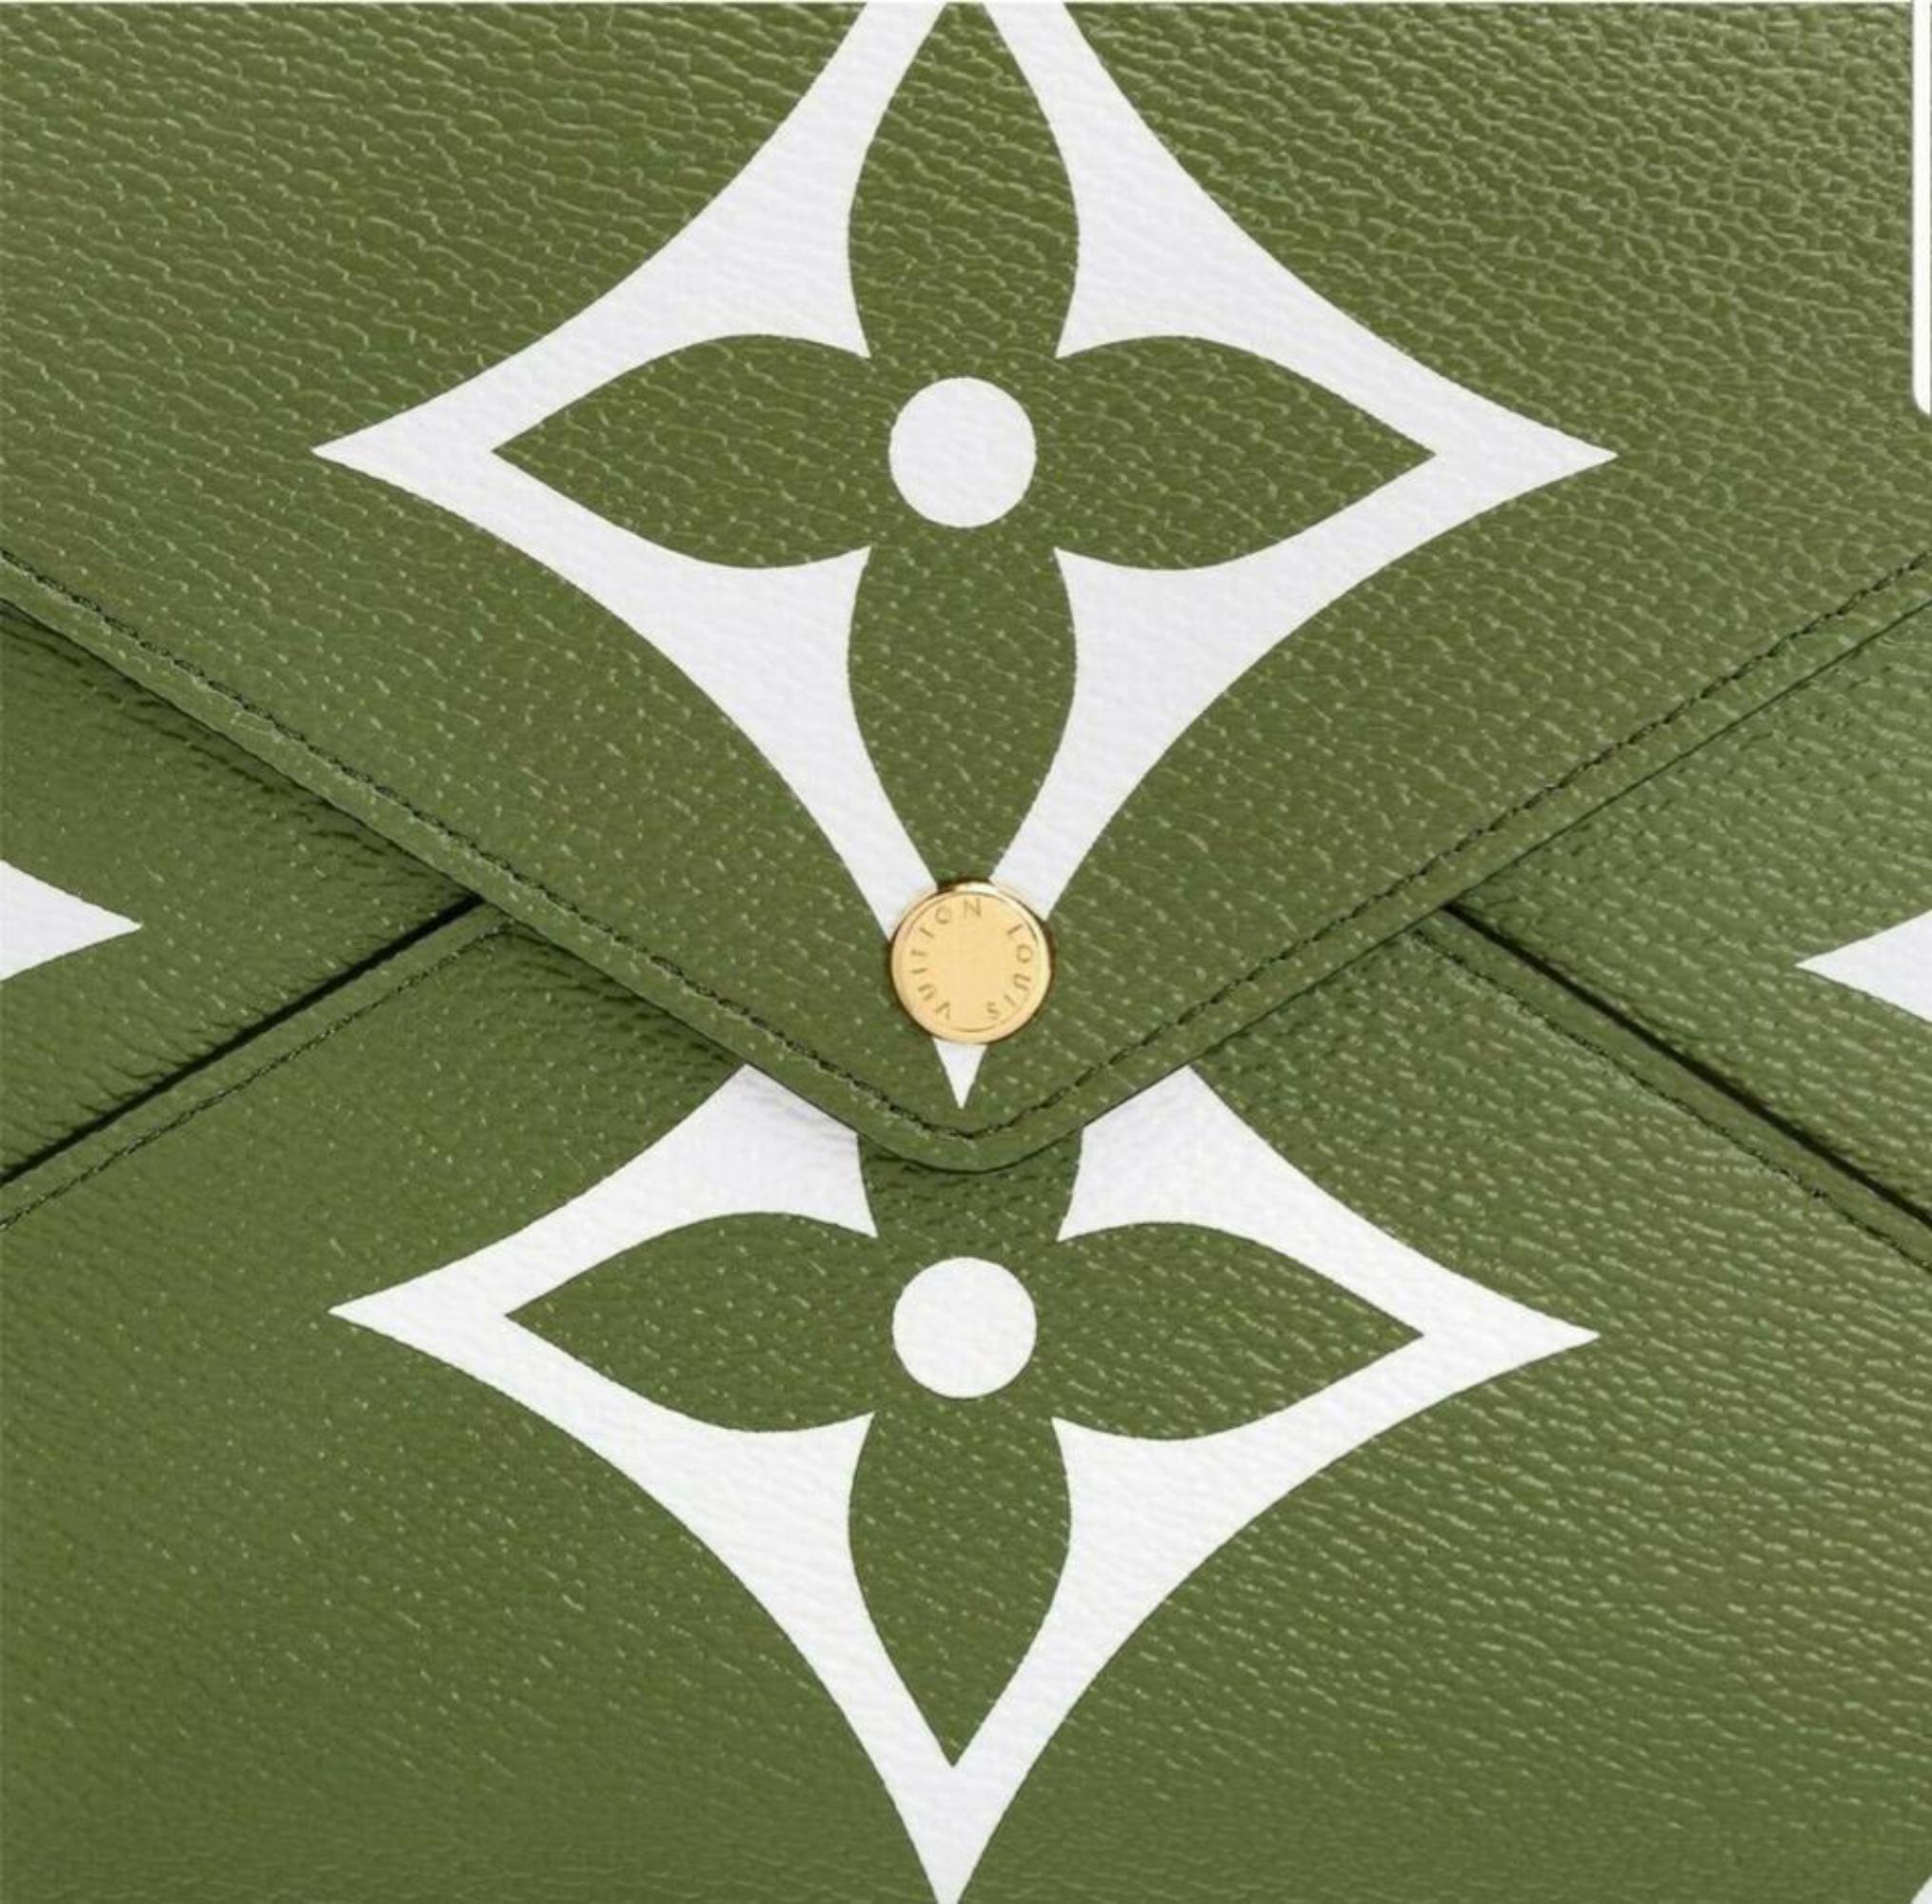 Louis Vuitton Khaki Large Ss19 Limited Edition Giant Kirigami Pouch 870618  For Sale 4